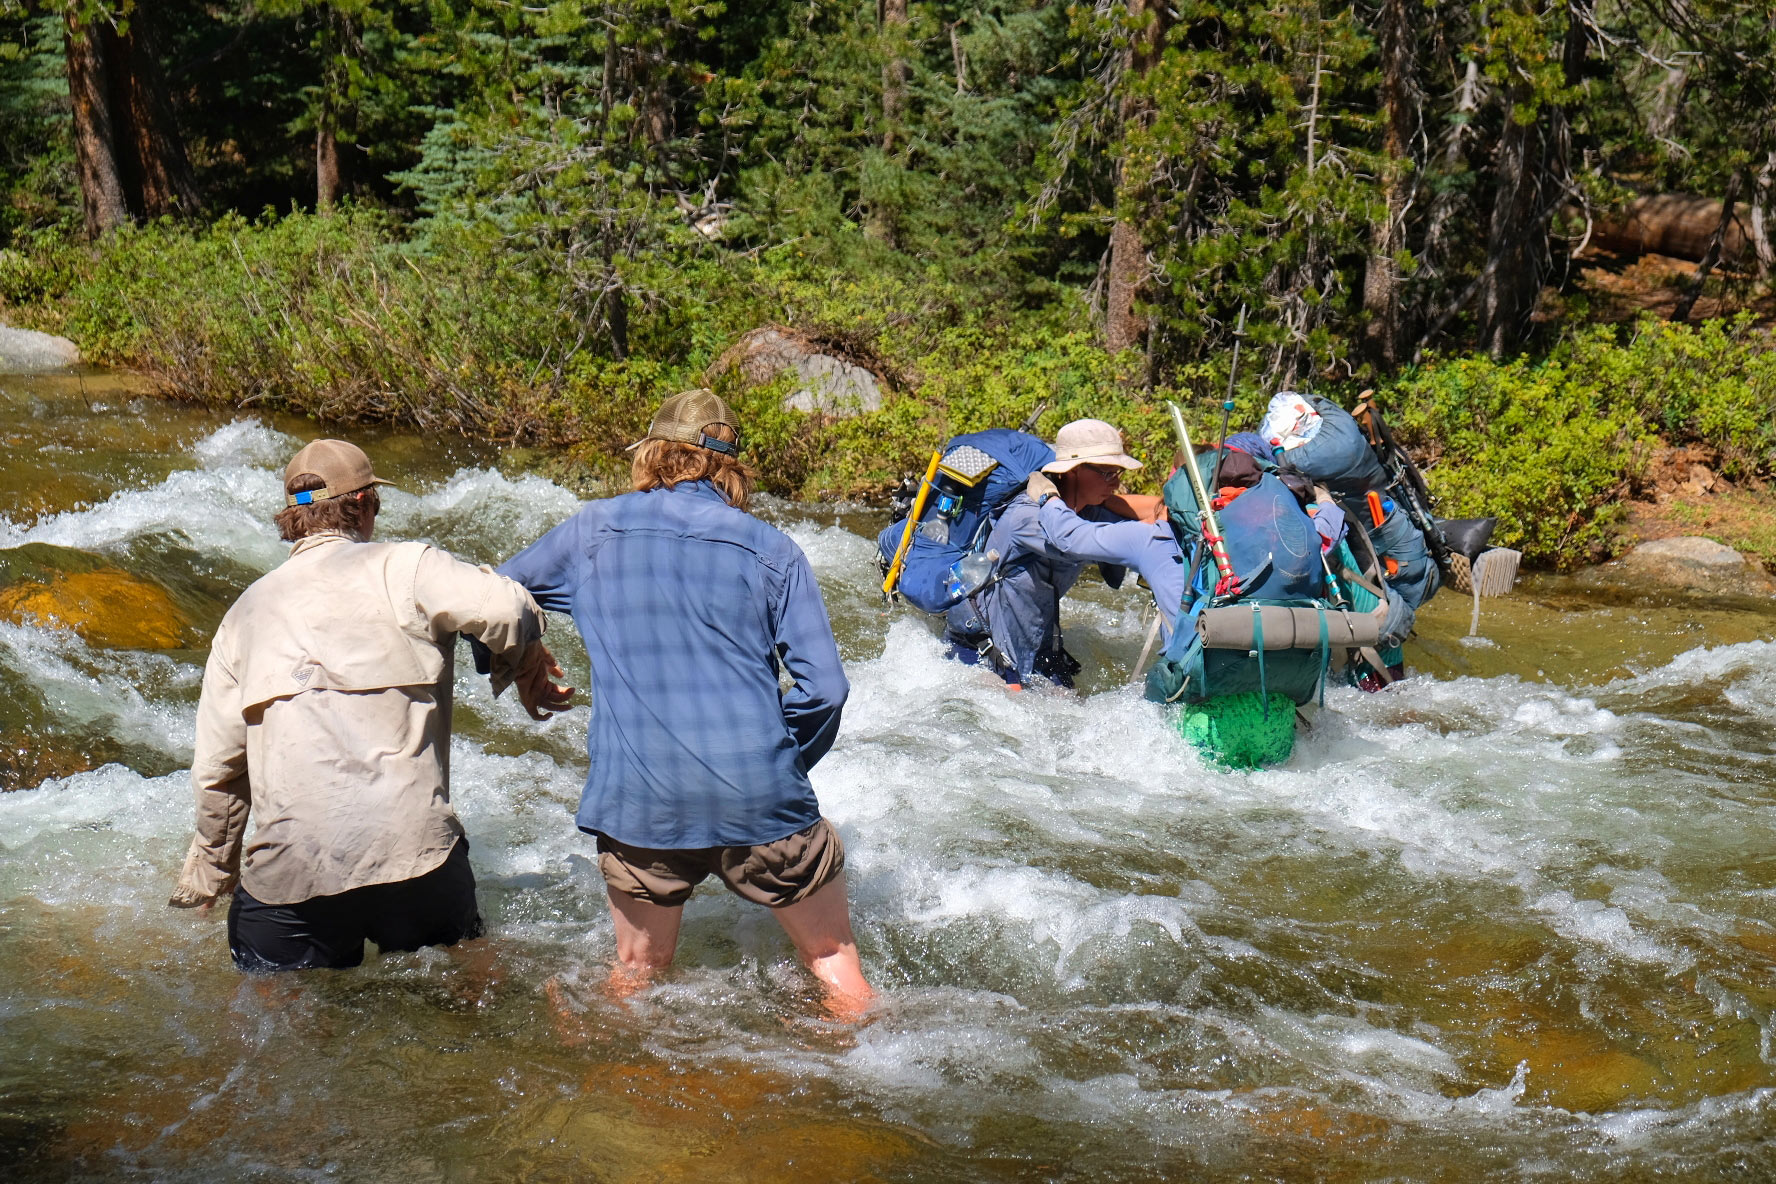 stream crossing safety advice for hikers and backpackers